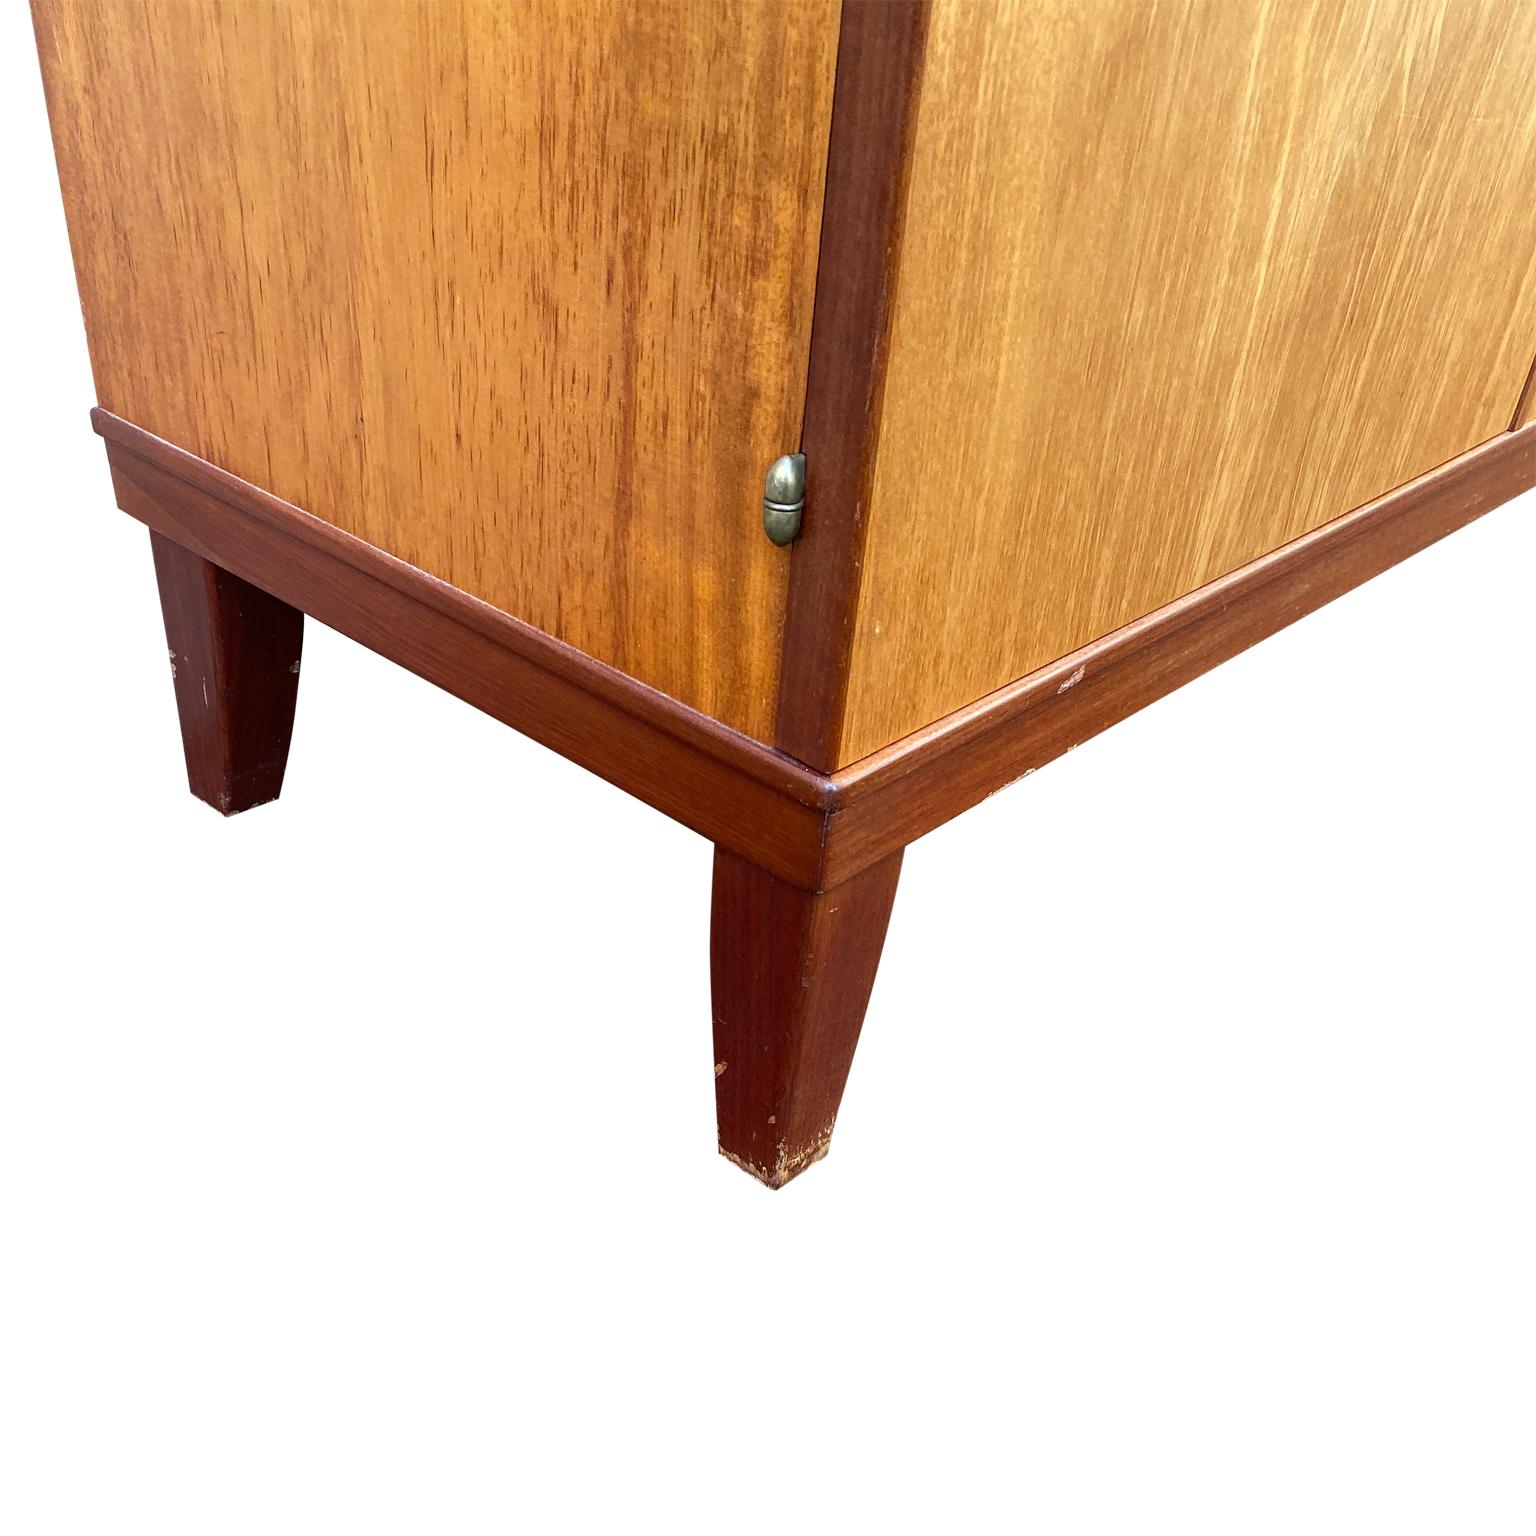 20th Century Swedish Mid-Century Modern Inlaid Cabinet With Brass Hardware By J.O. Carlssons